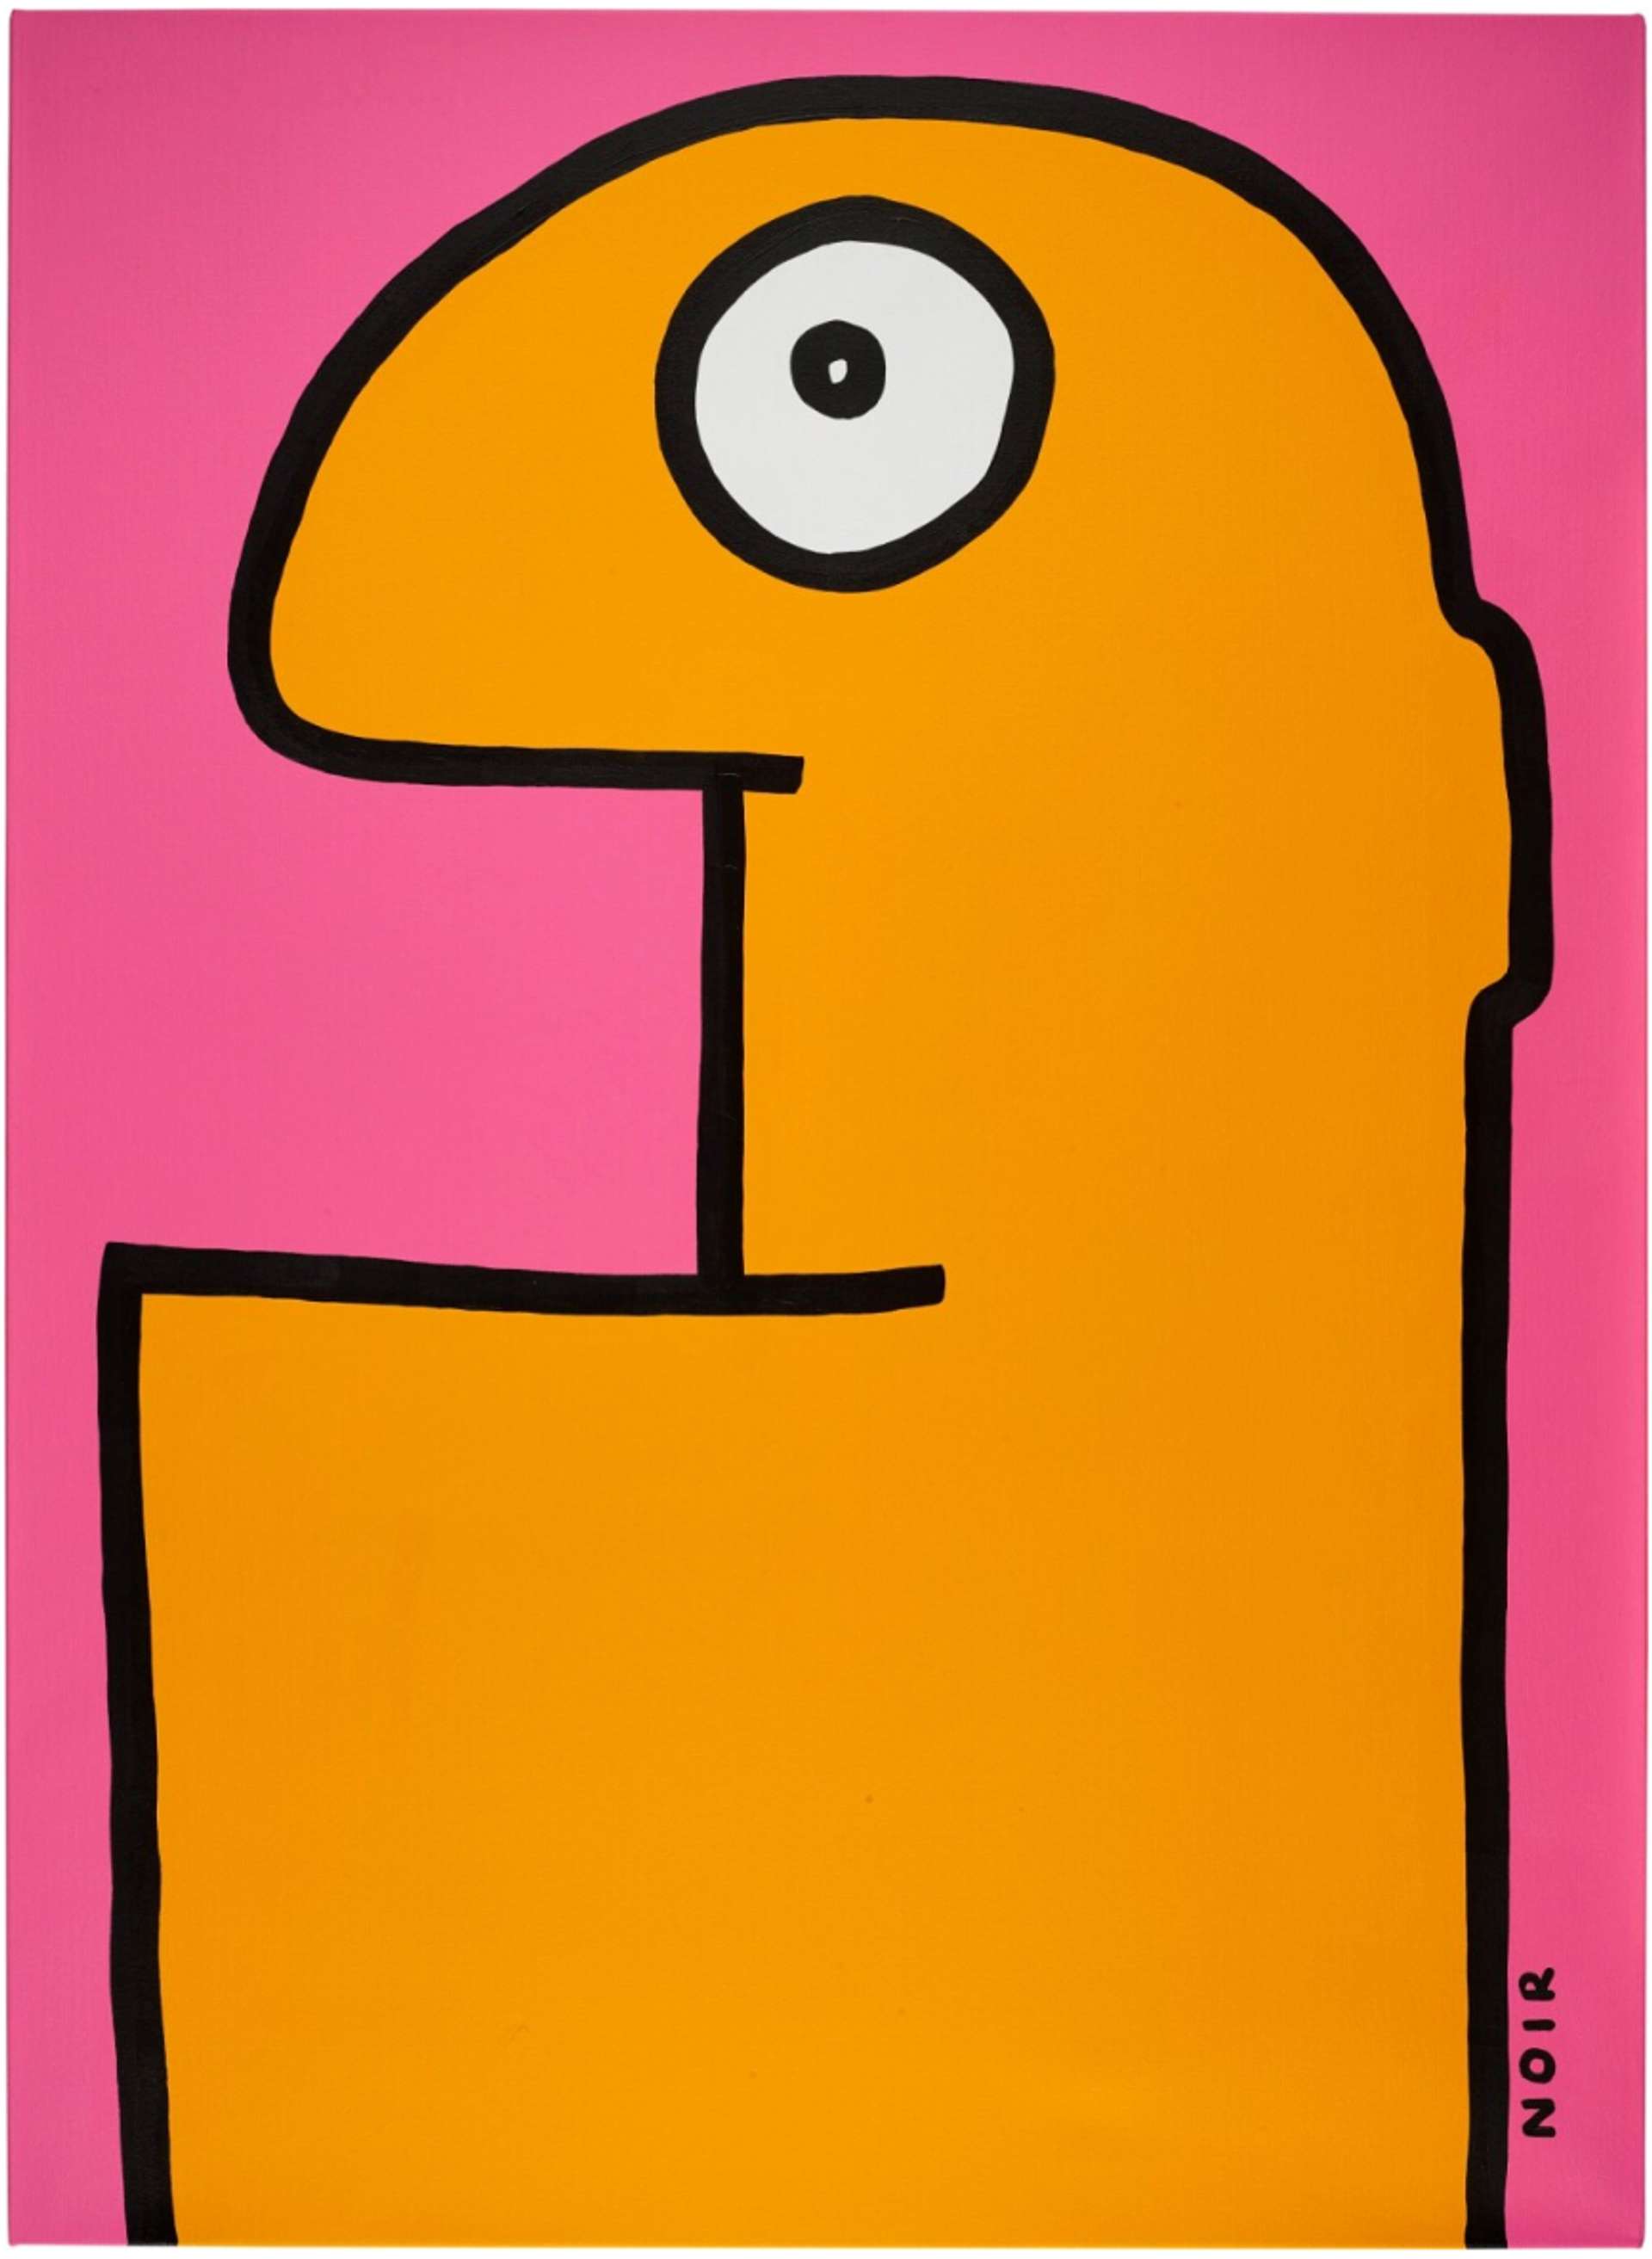  A vibrant pink and orange abstracted palette with a bold black line drawing of an abstracted caricature. The figure is two-dimensional and features a prominent white eyeball. The artwork is signed "NOIR" in the bottom right-hand corner.